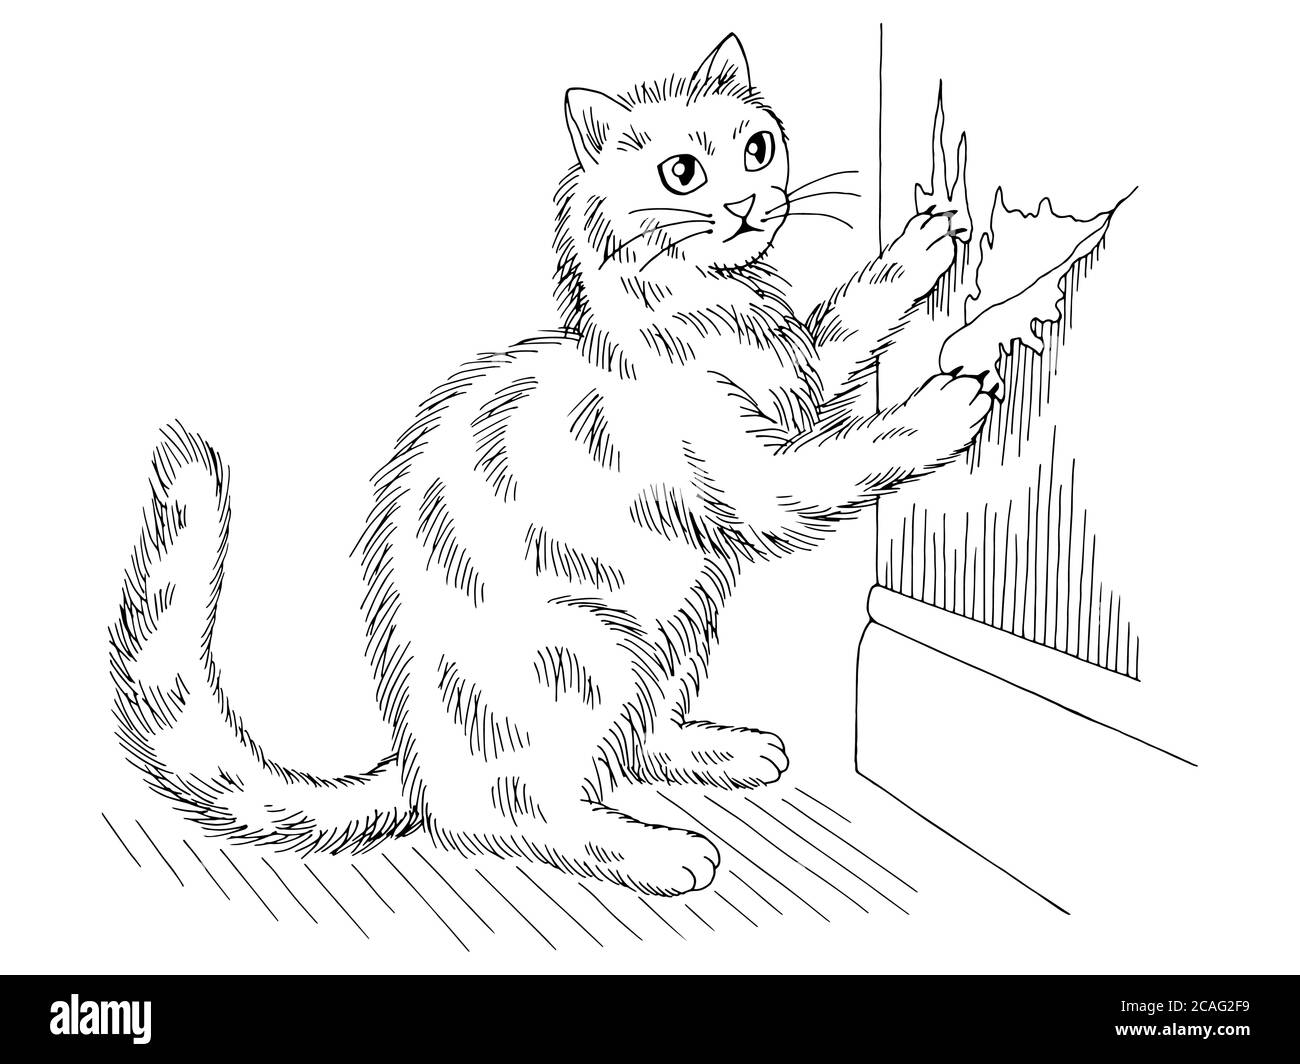 Cat is sharpening claws tearing wallpaper graphic black white sketch illustration vector Stock Vector